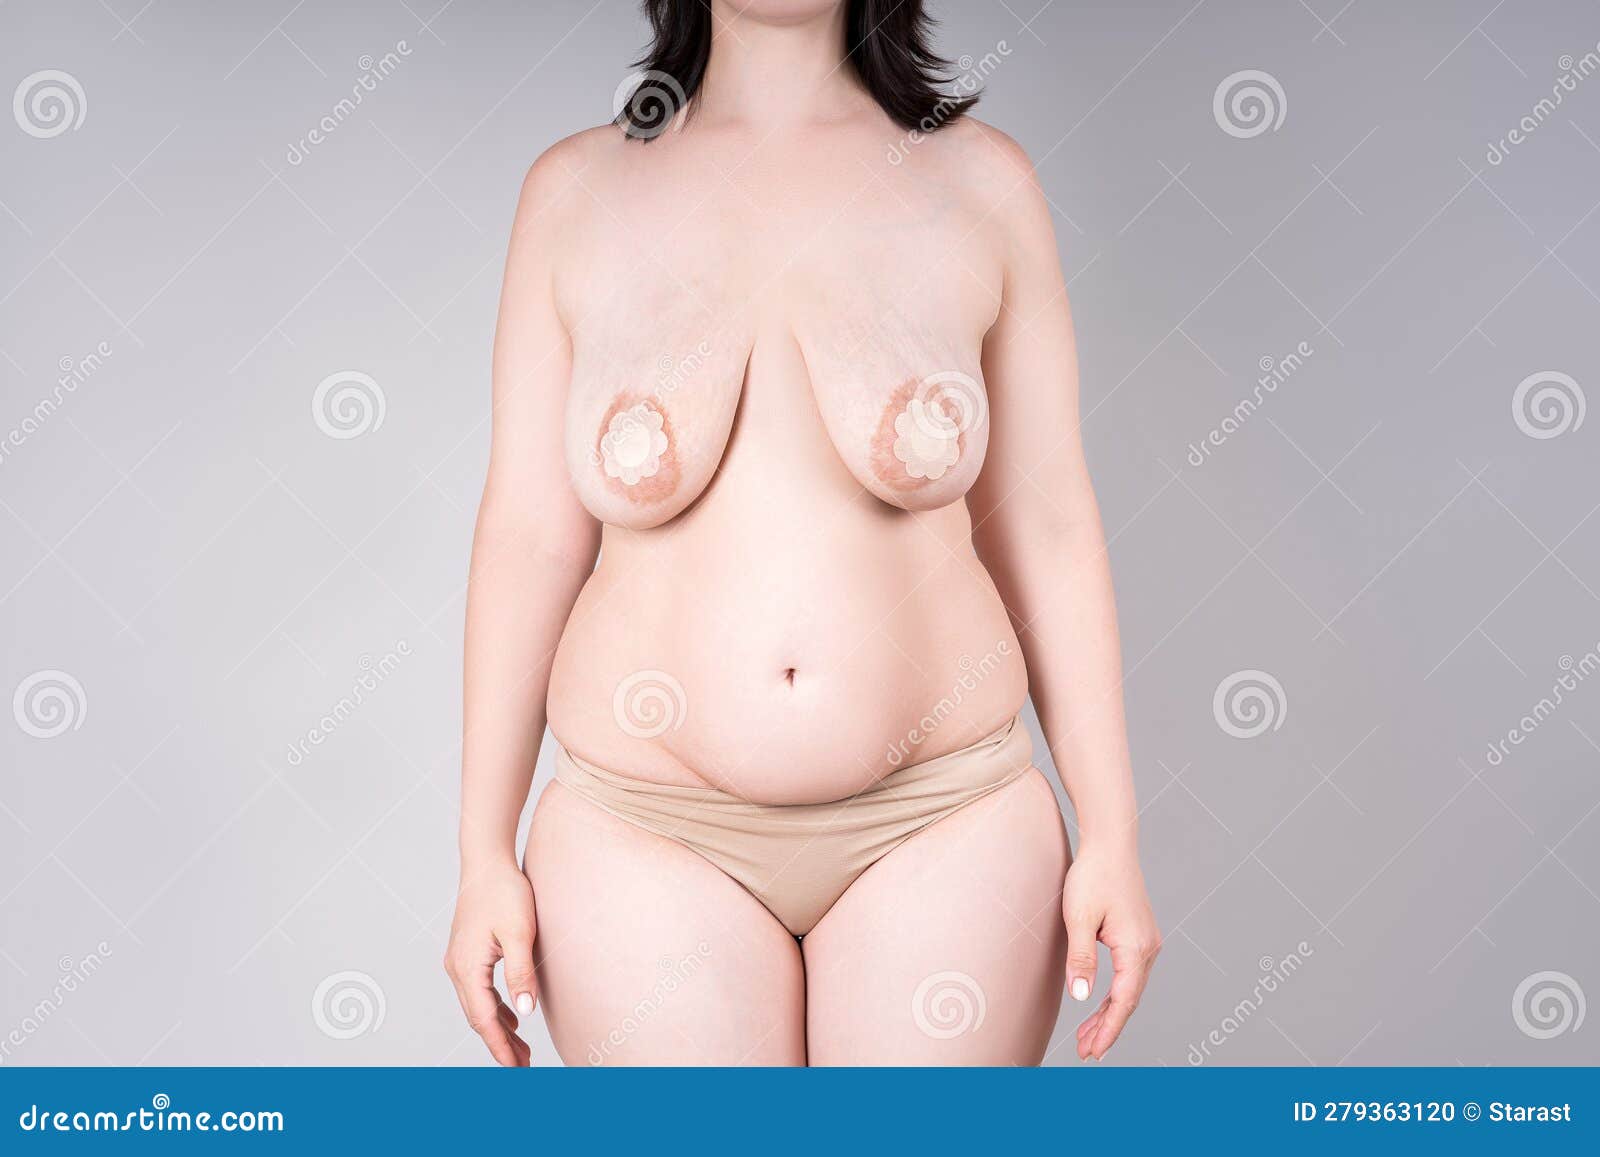 women with saggy tits